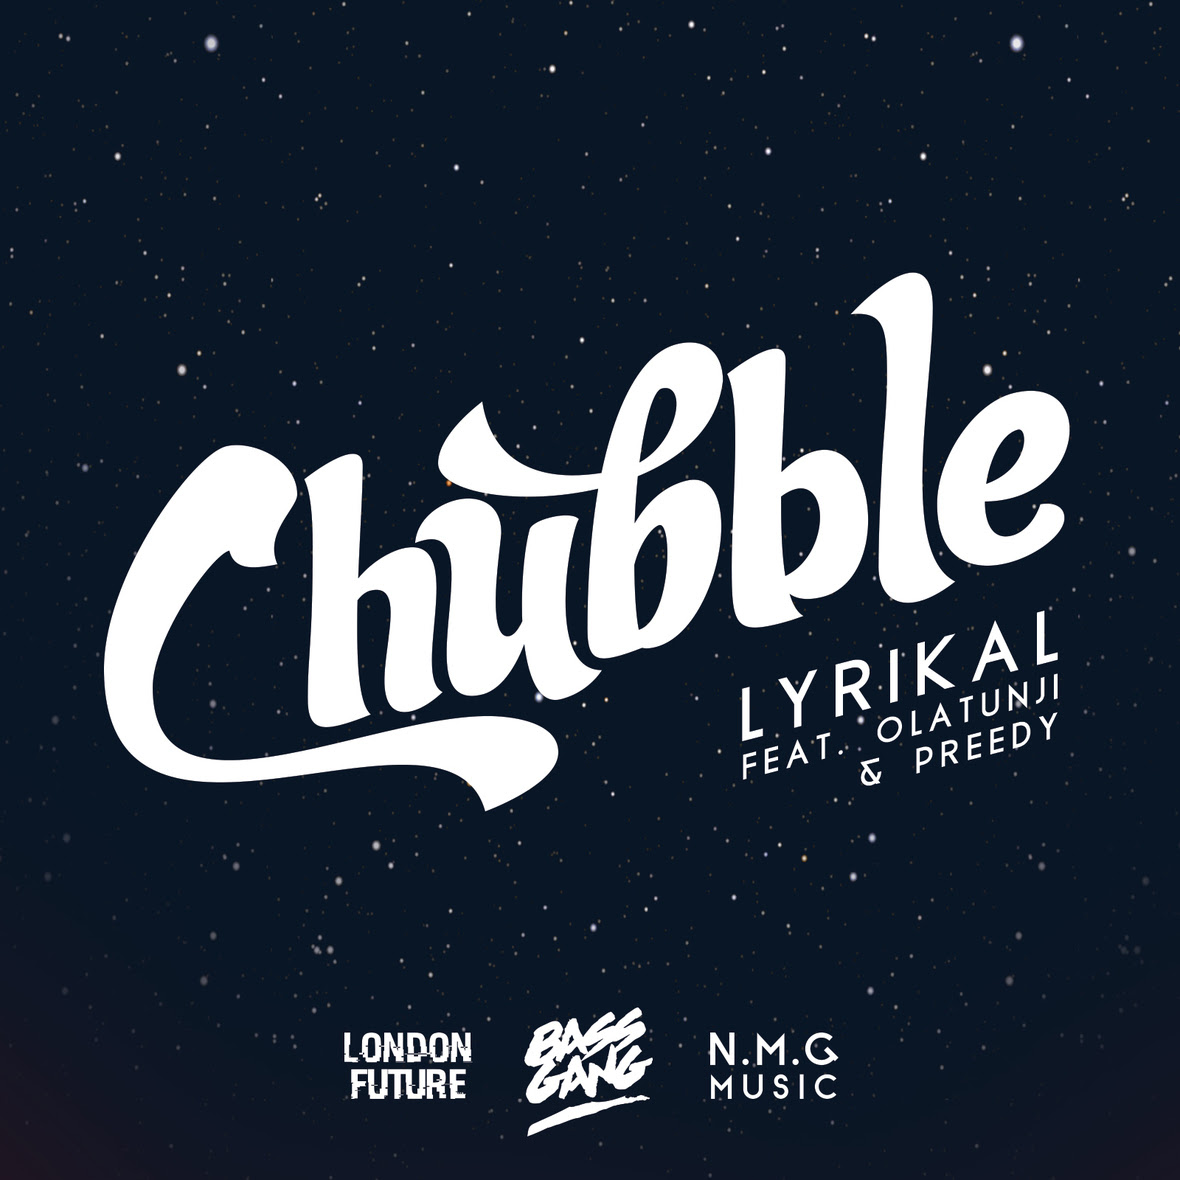 CHUBBLE-COVER-STARS